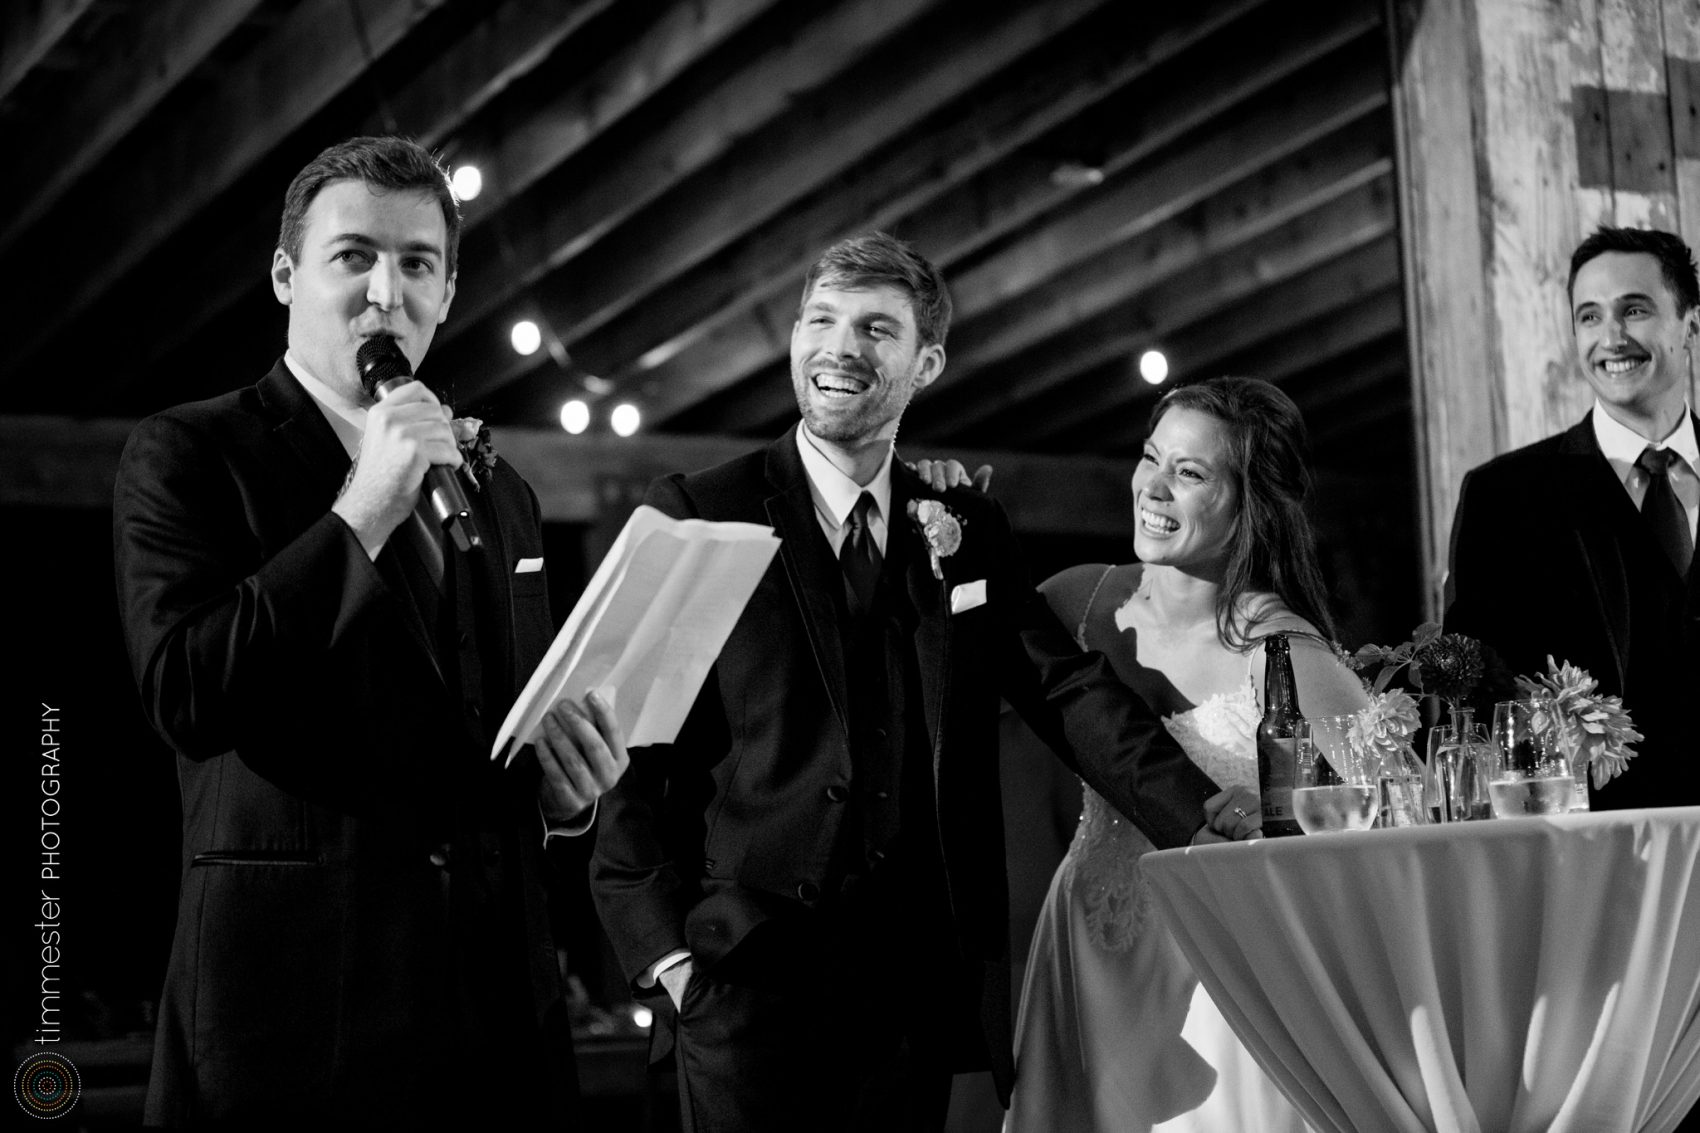 Toasts and wedding reception in the barn of Sassafras Fork Farm in NC.